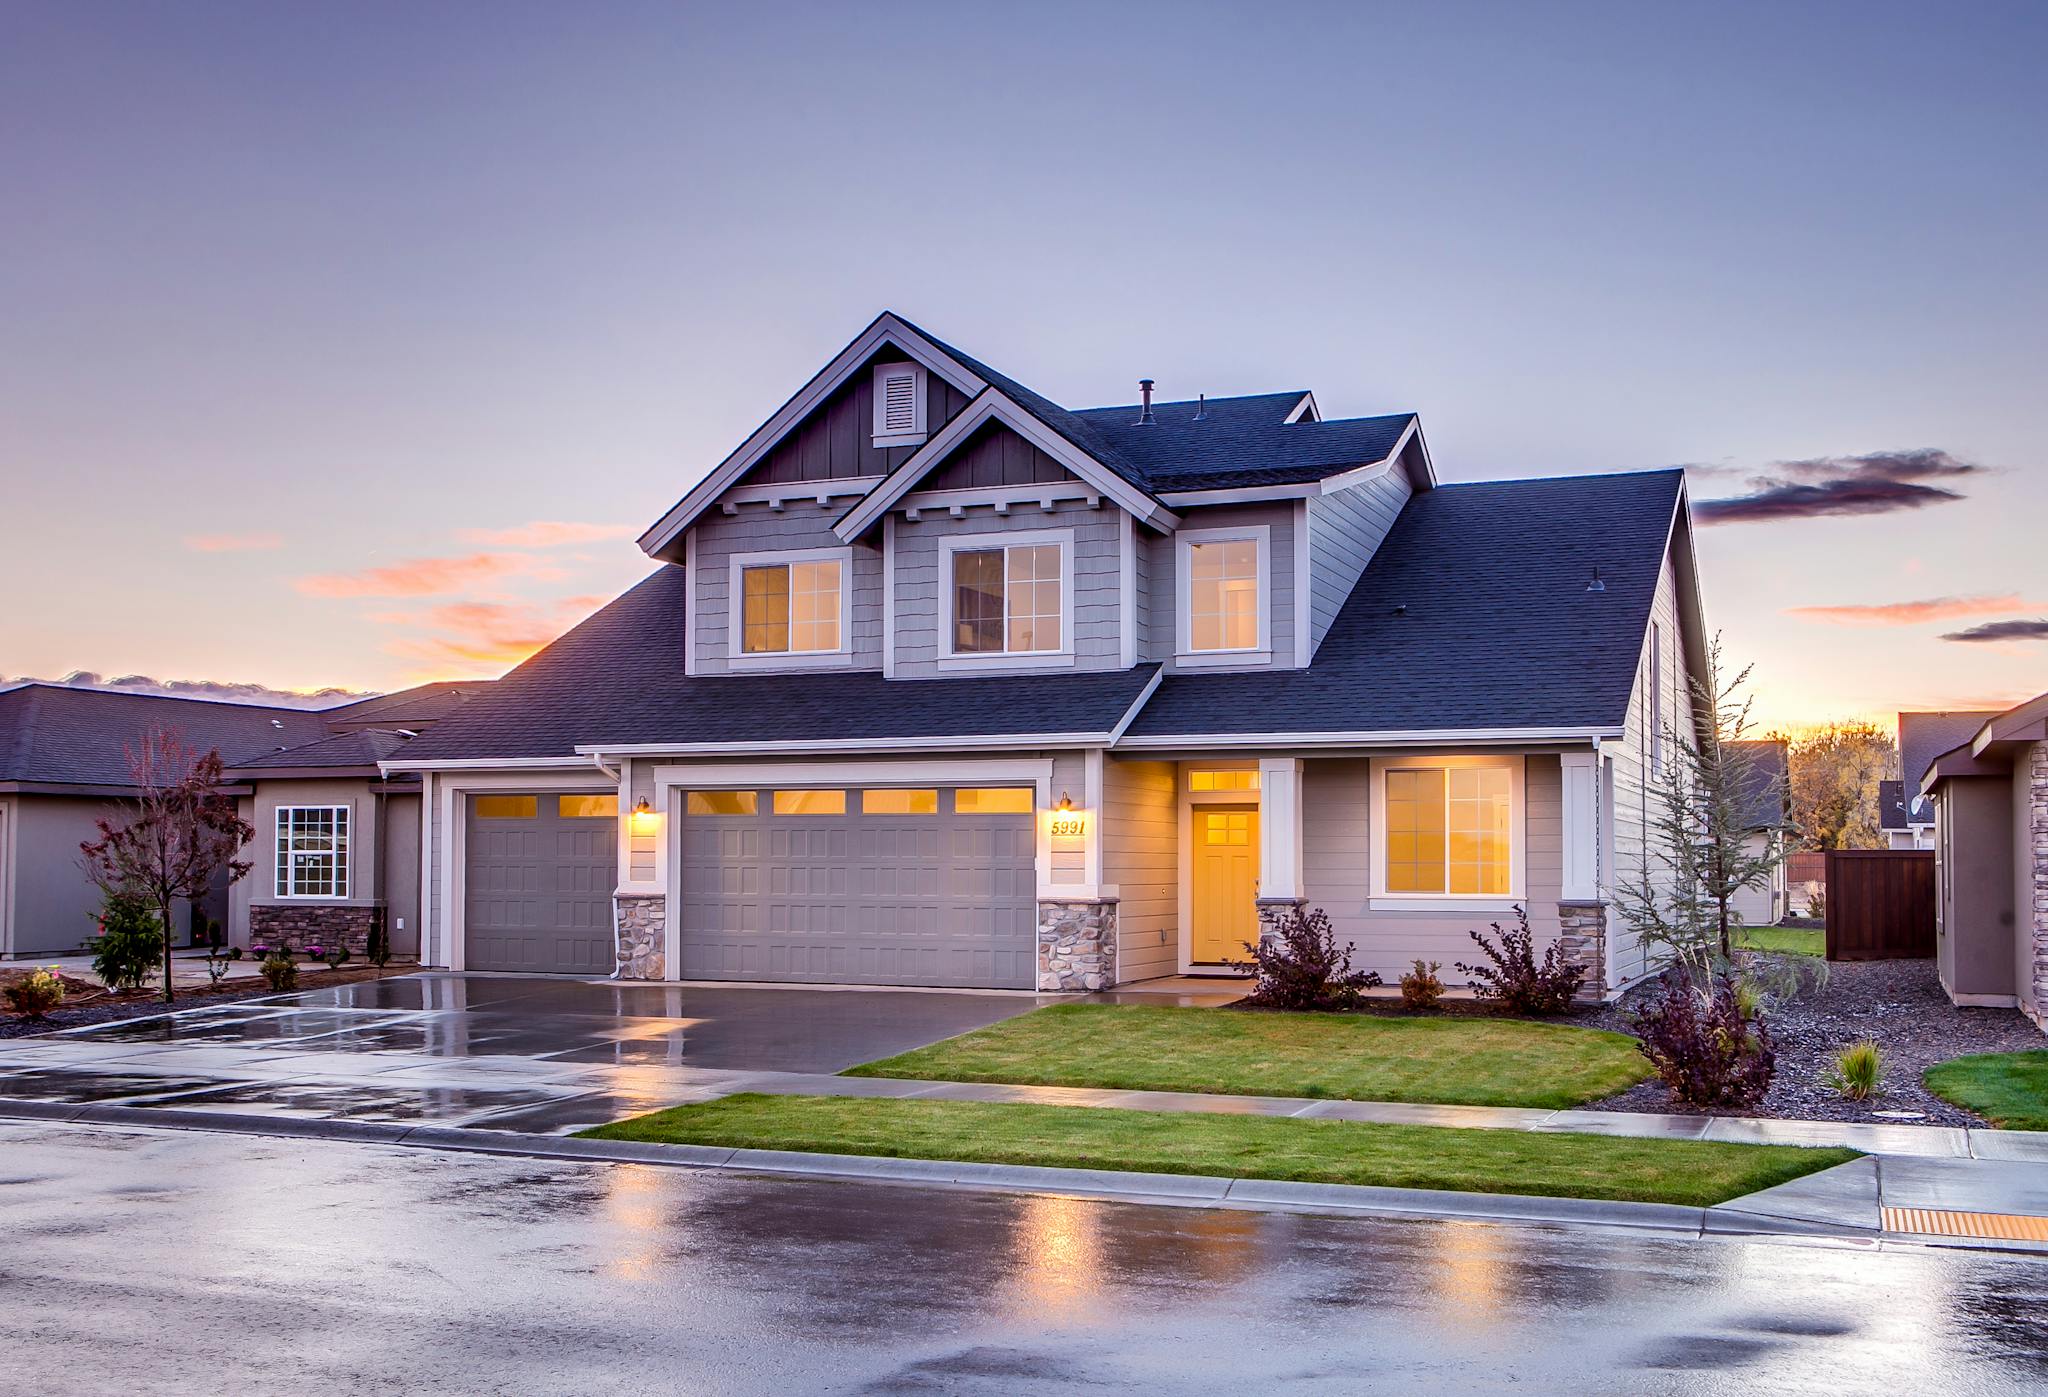 8 Things Every Home Buyer Should Be Aware Of